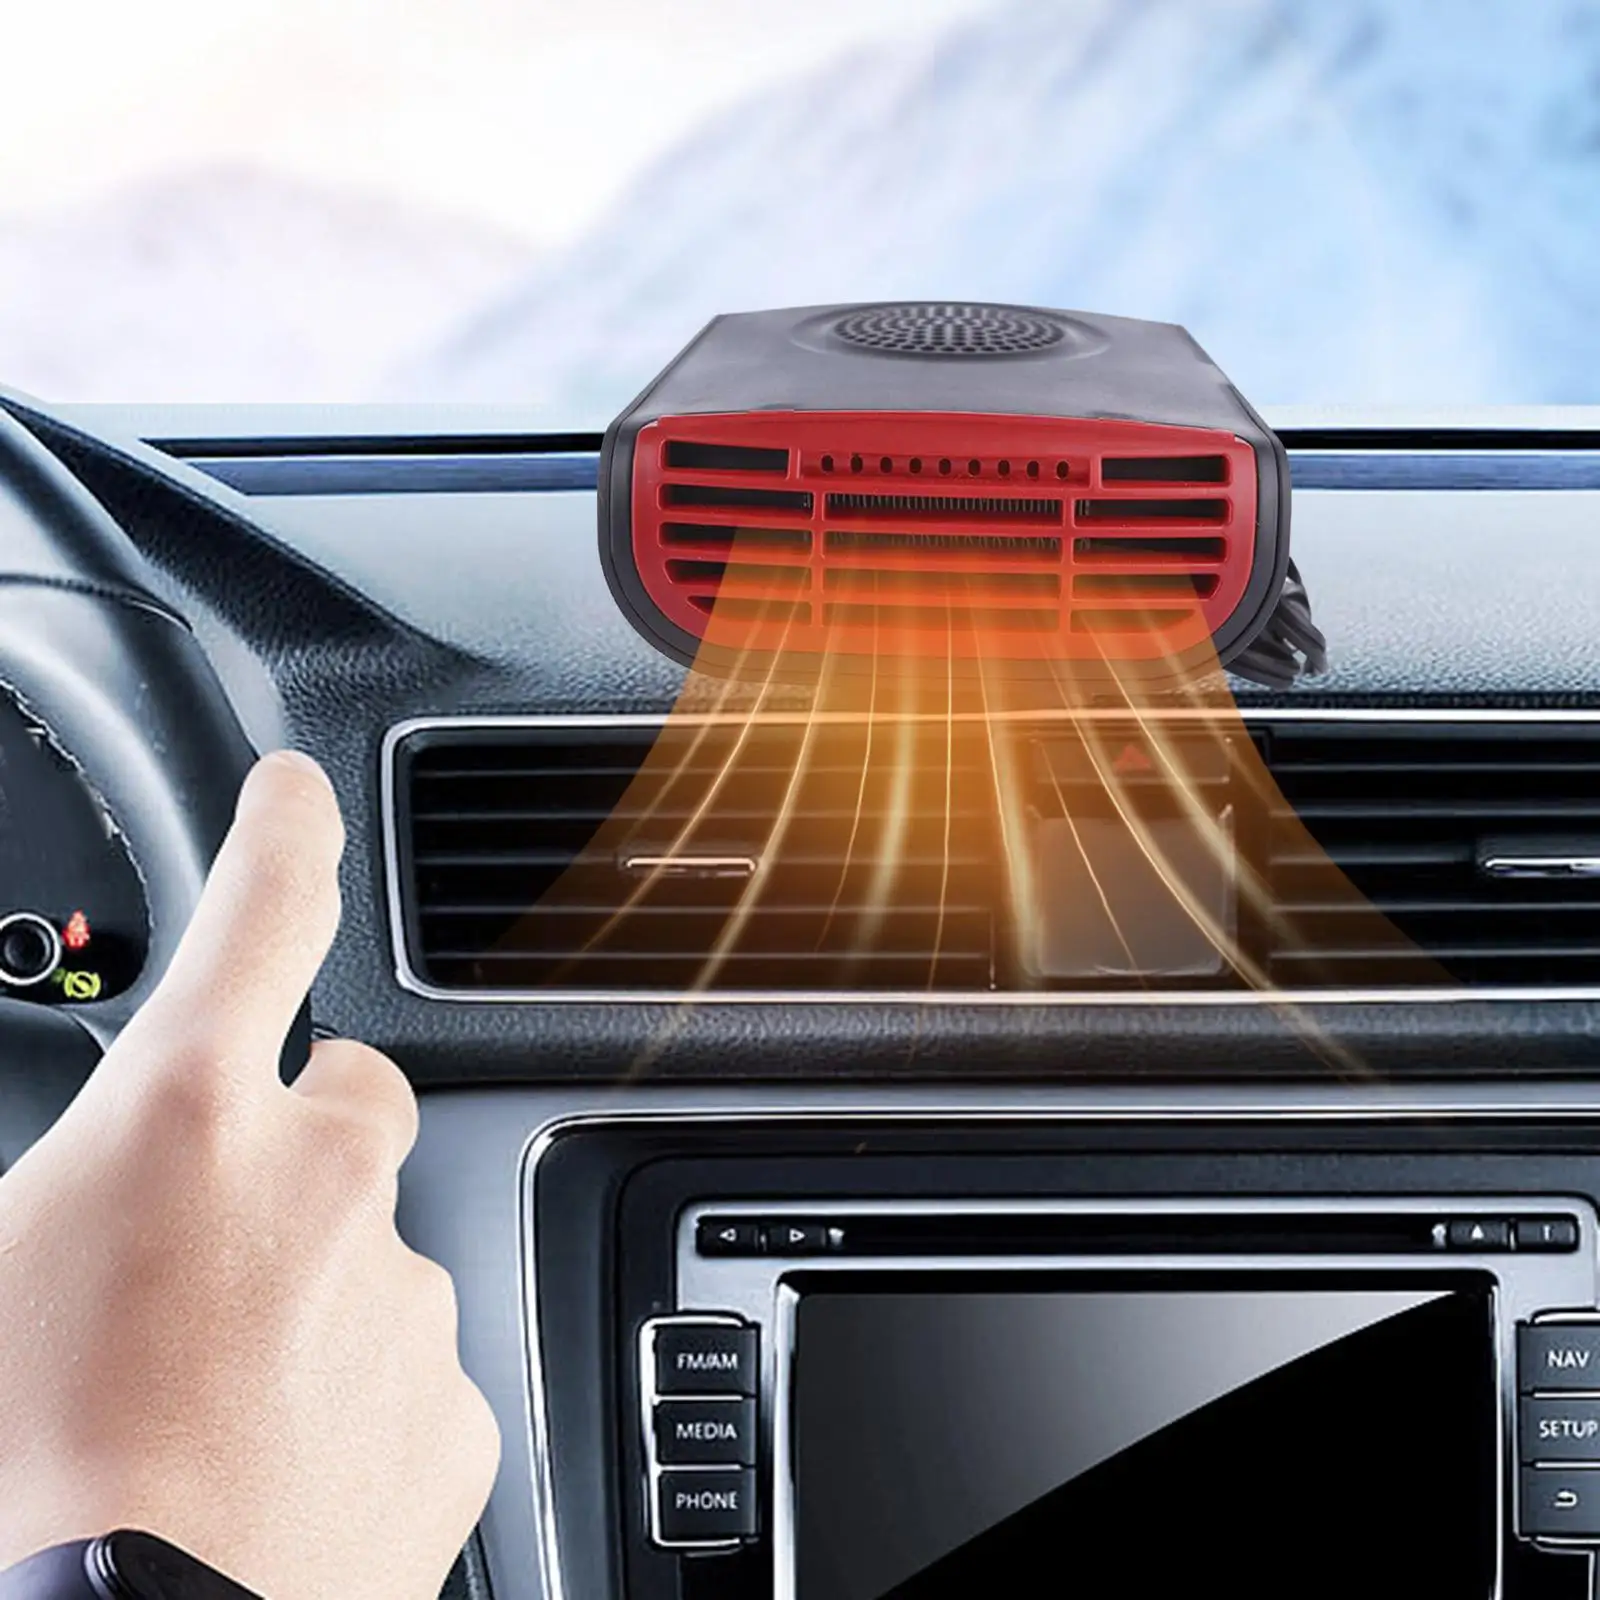 12V 150W Car Interior Heater Fan Window Defroster Vehicles in Winter Universal for Easily Install Professional Accessory